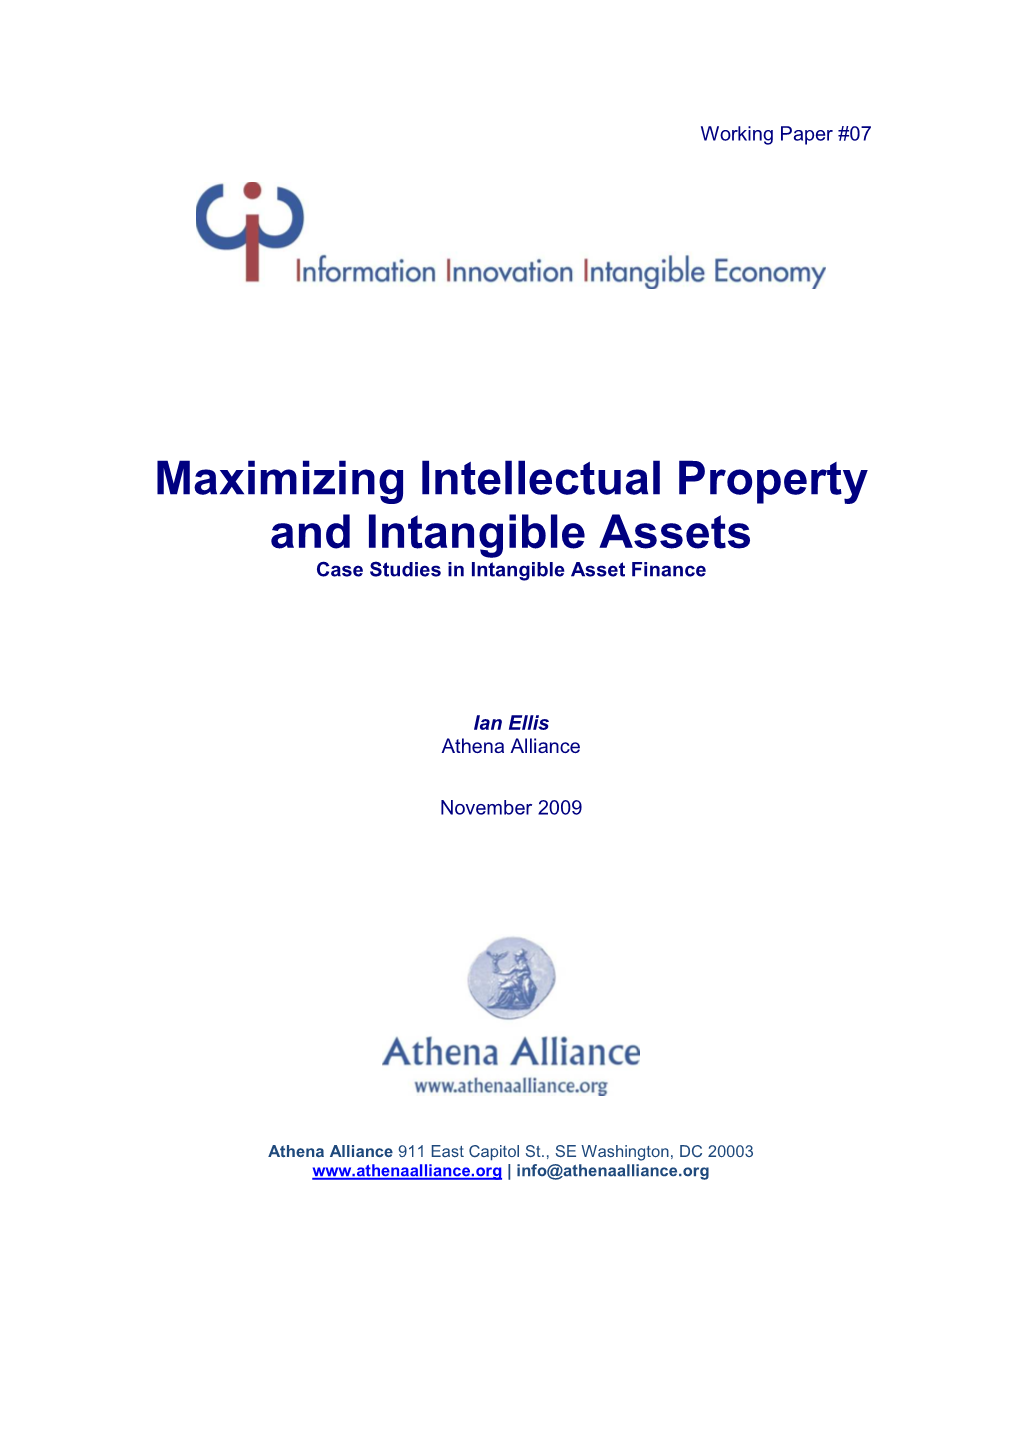 Maximizing Intellectual Property and Intangible Assets Case Studies in Intangible Asset Finance